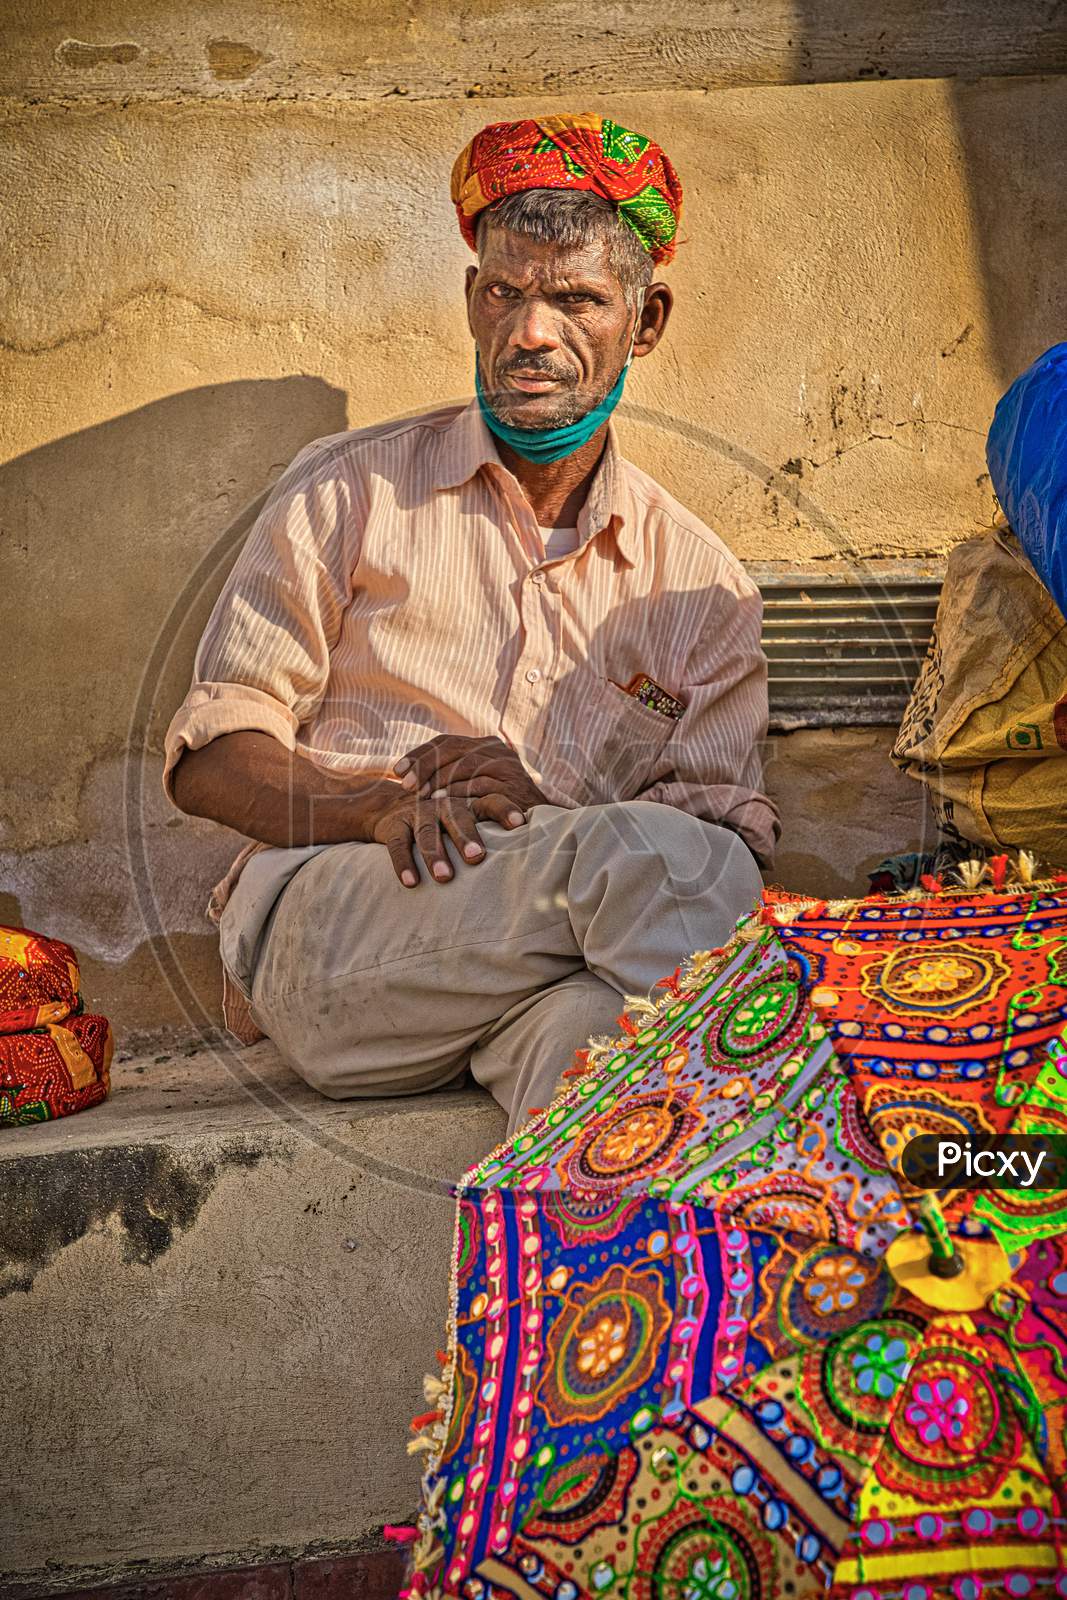 A street vendor at Amer fort selling colourful turbans.